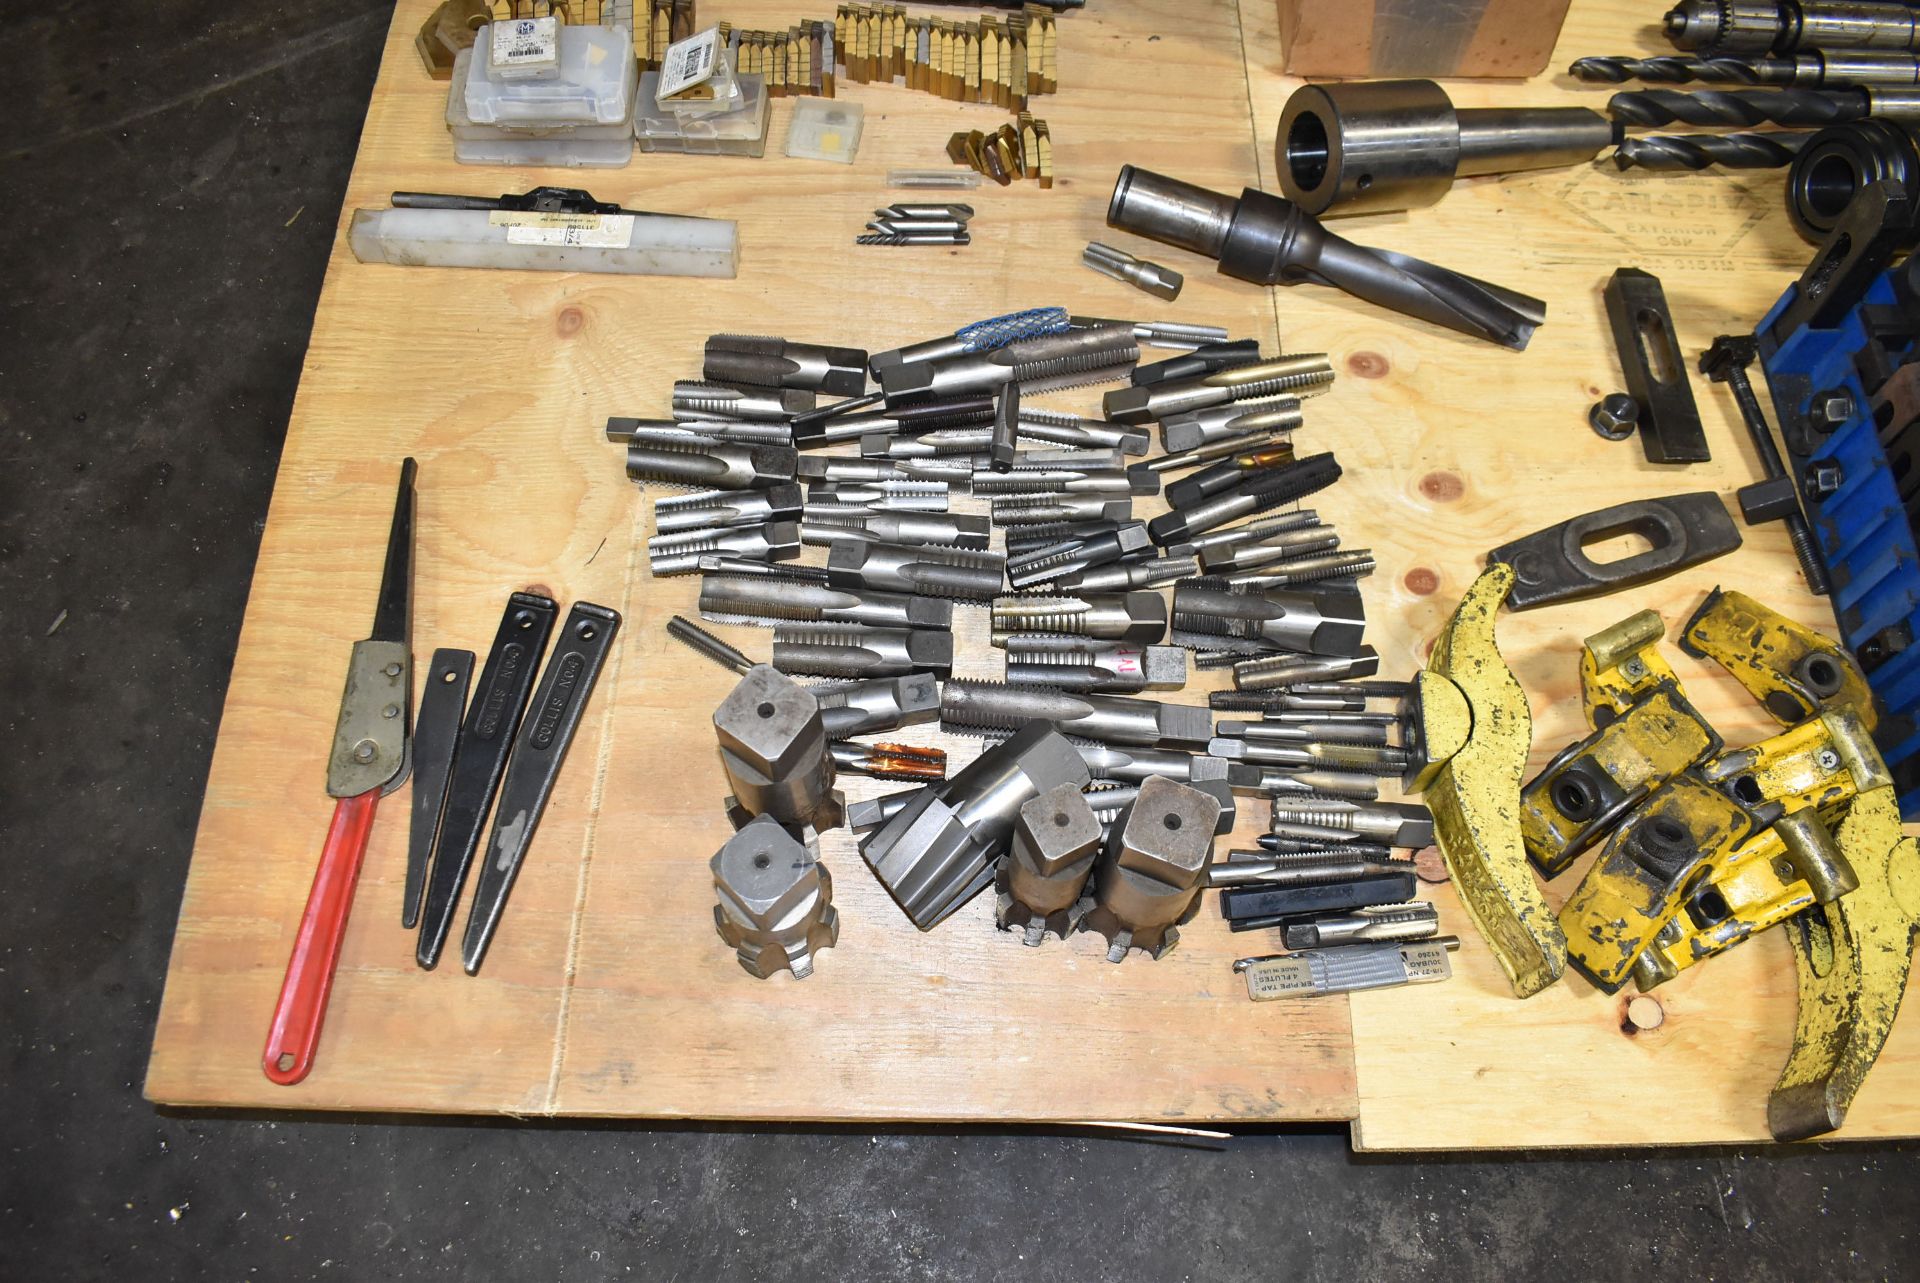 LOT/ CONTENTS OF PALLET CONSISTING OF TAPS, DRILLS AND TIE DOWN CLAMPING - Image 2 of 5